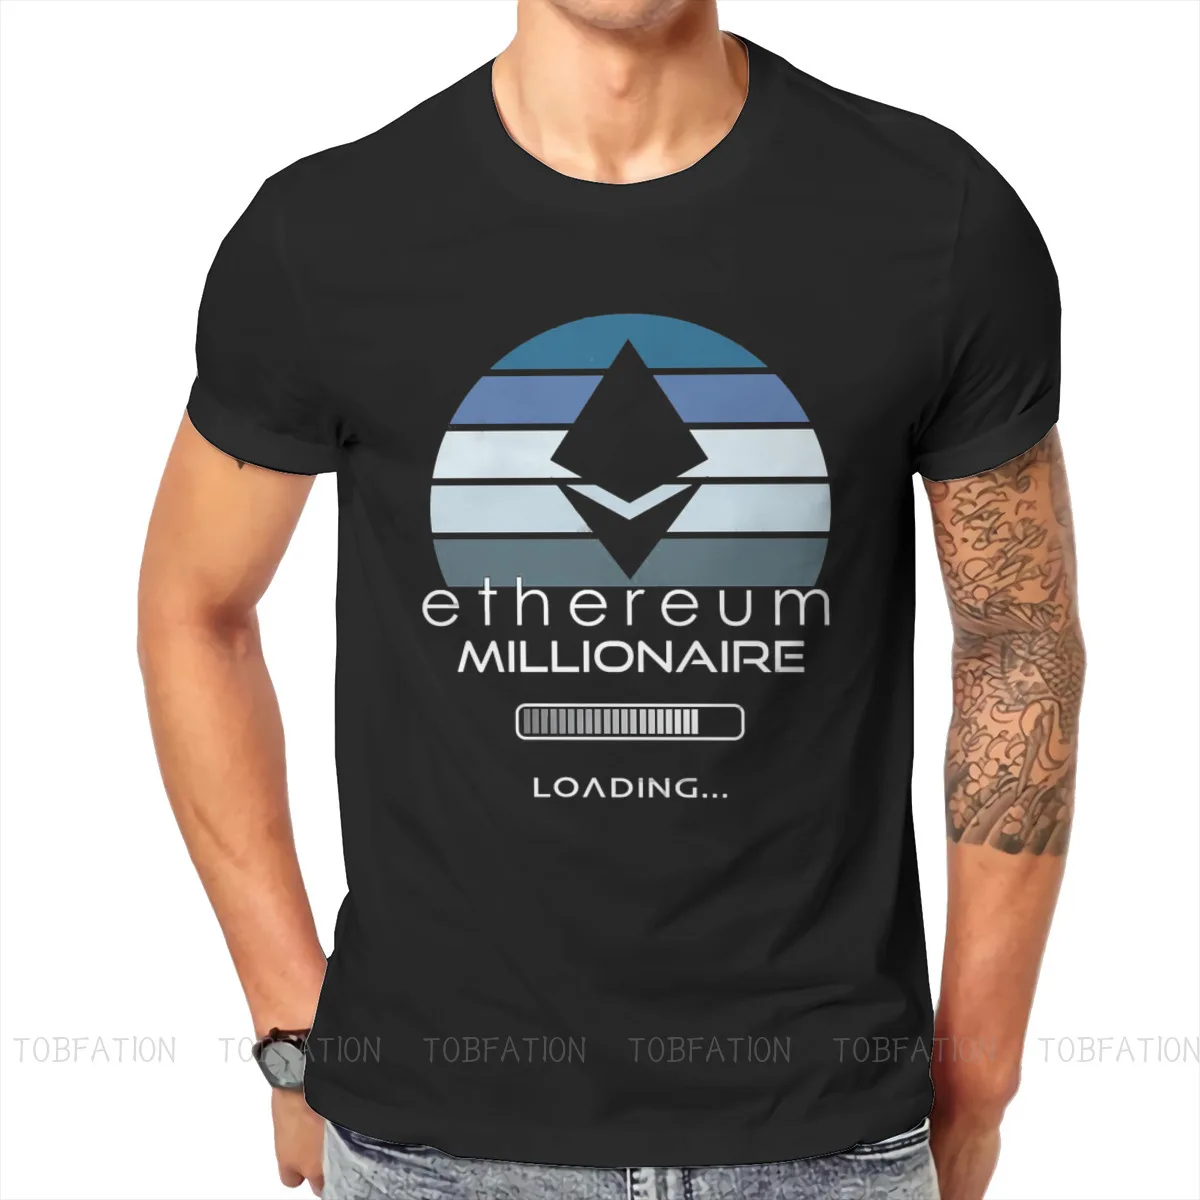 

Cryptocurrency Crypto Miner Ethereum Millionaire Loading Tshirt Vintage Gothic Men Clothes Tops Big Size Cotton O-Neck T Shirt